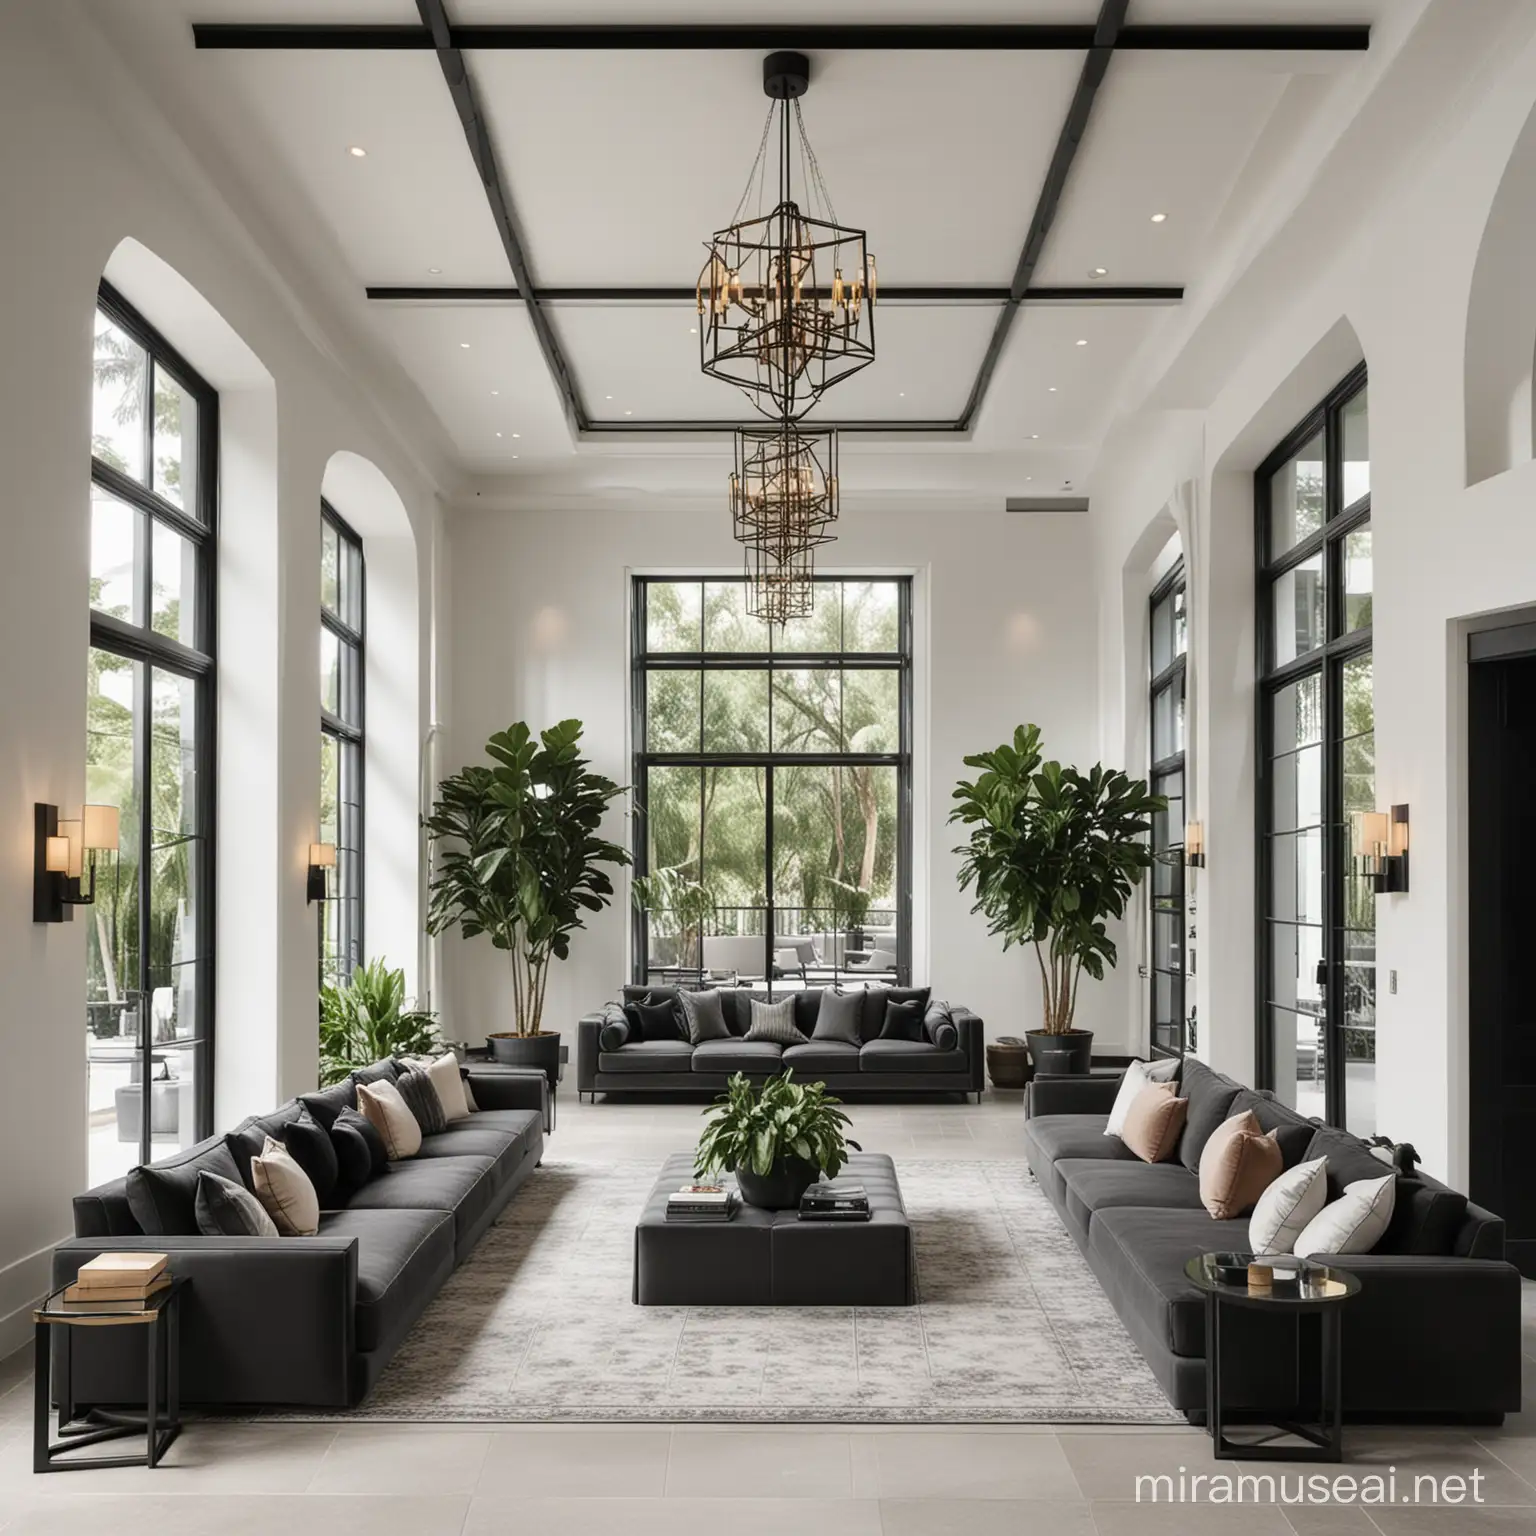 large modern, contemporary hotel lobby with white walls, large windows, geometric chandelier and sconces with black finishes, and coffered ceilings. large plants throughout the place with two L shaped couches